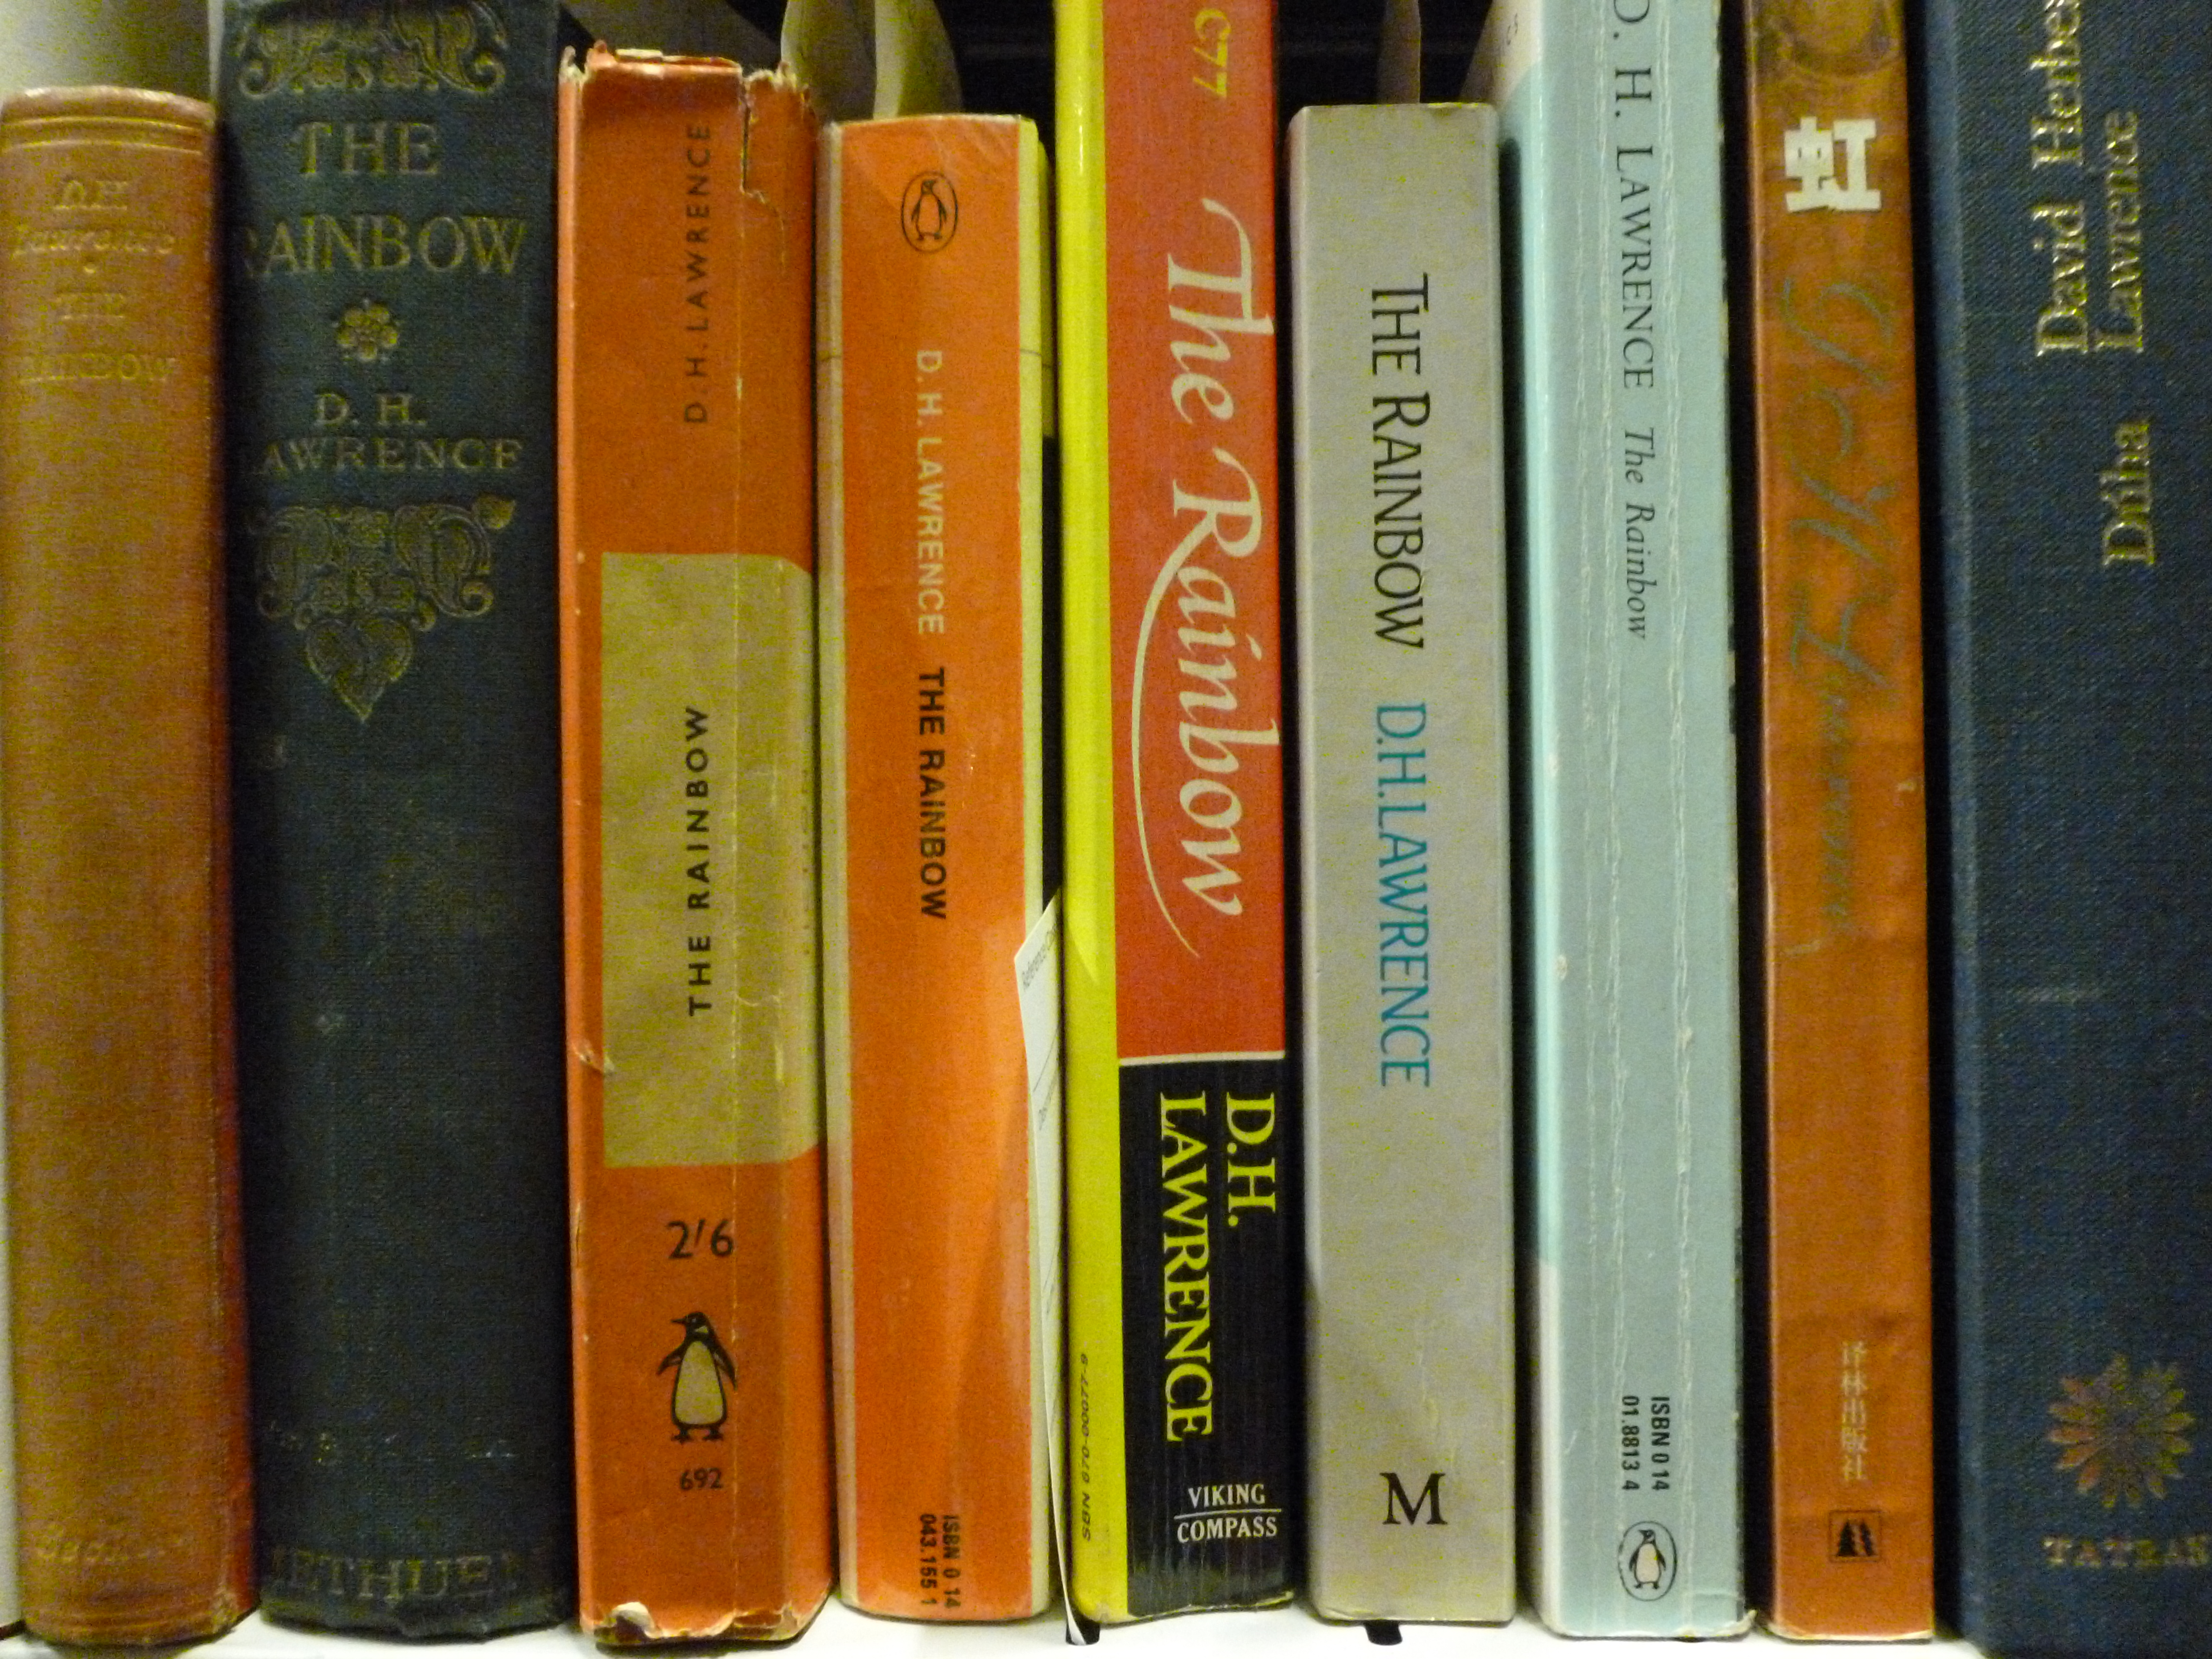 Copies of various editions of DH Lawrence's 'The Rainbow' on the shelves